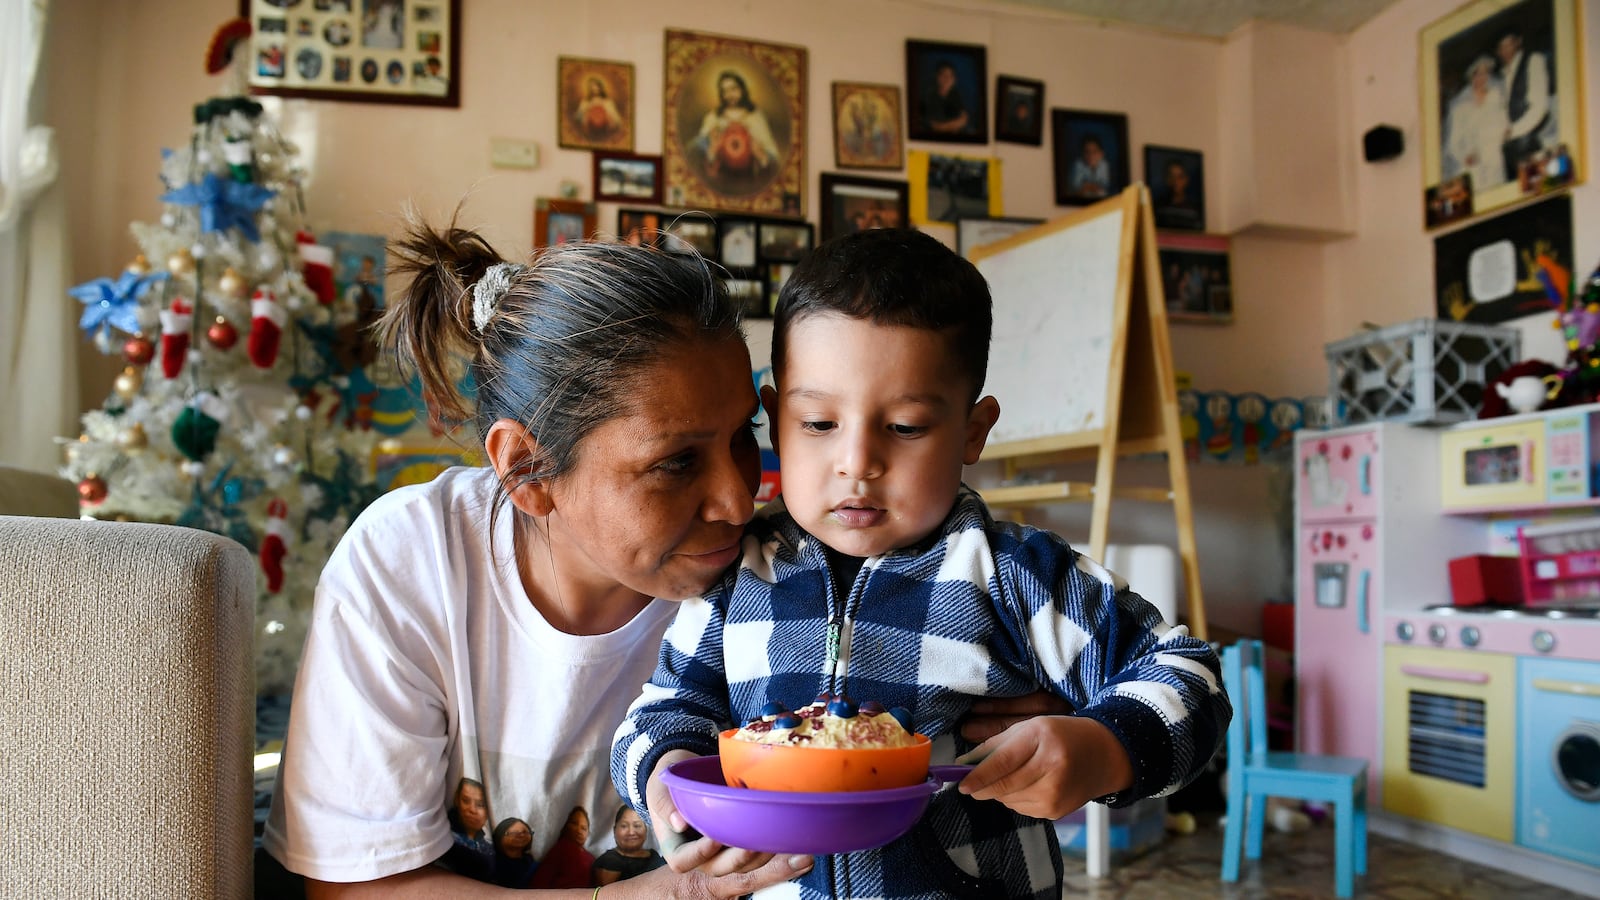 Olga Montellano, an informal child care provider, says goodbye to Mateo Casillas, 2, after caring for him for the day.